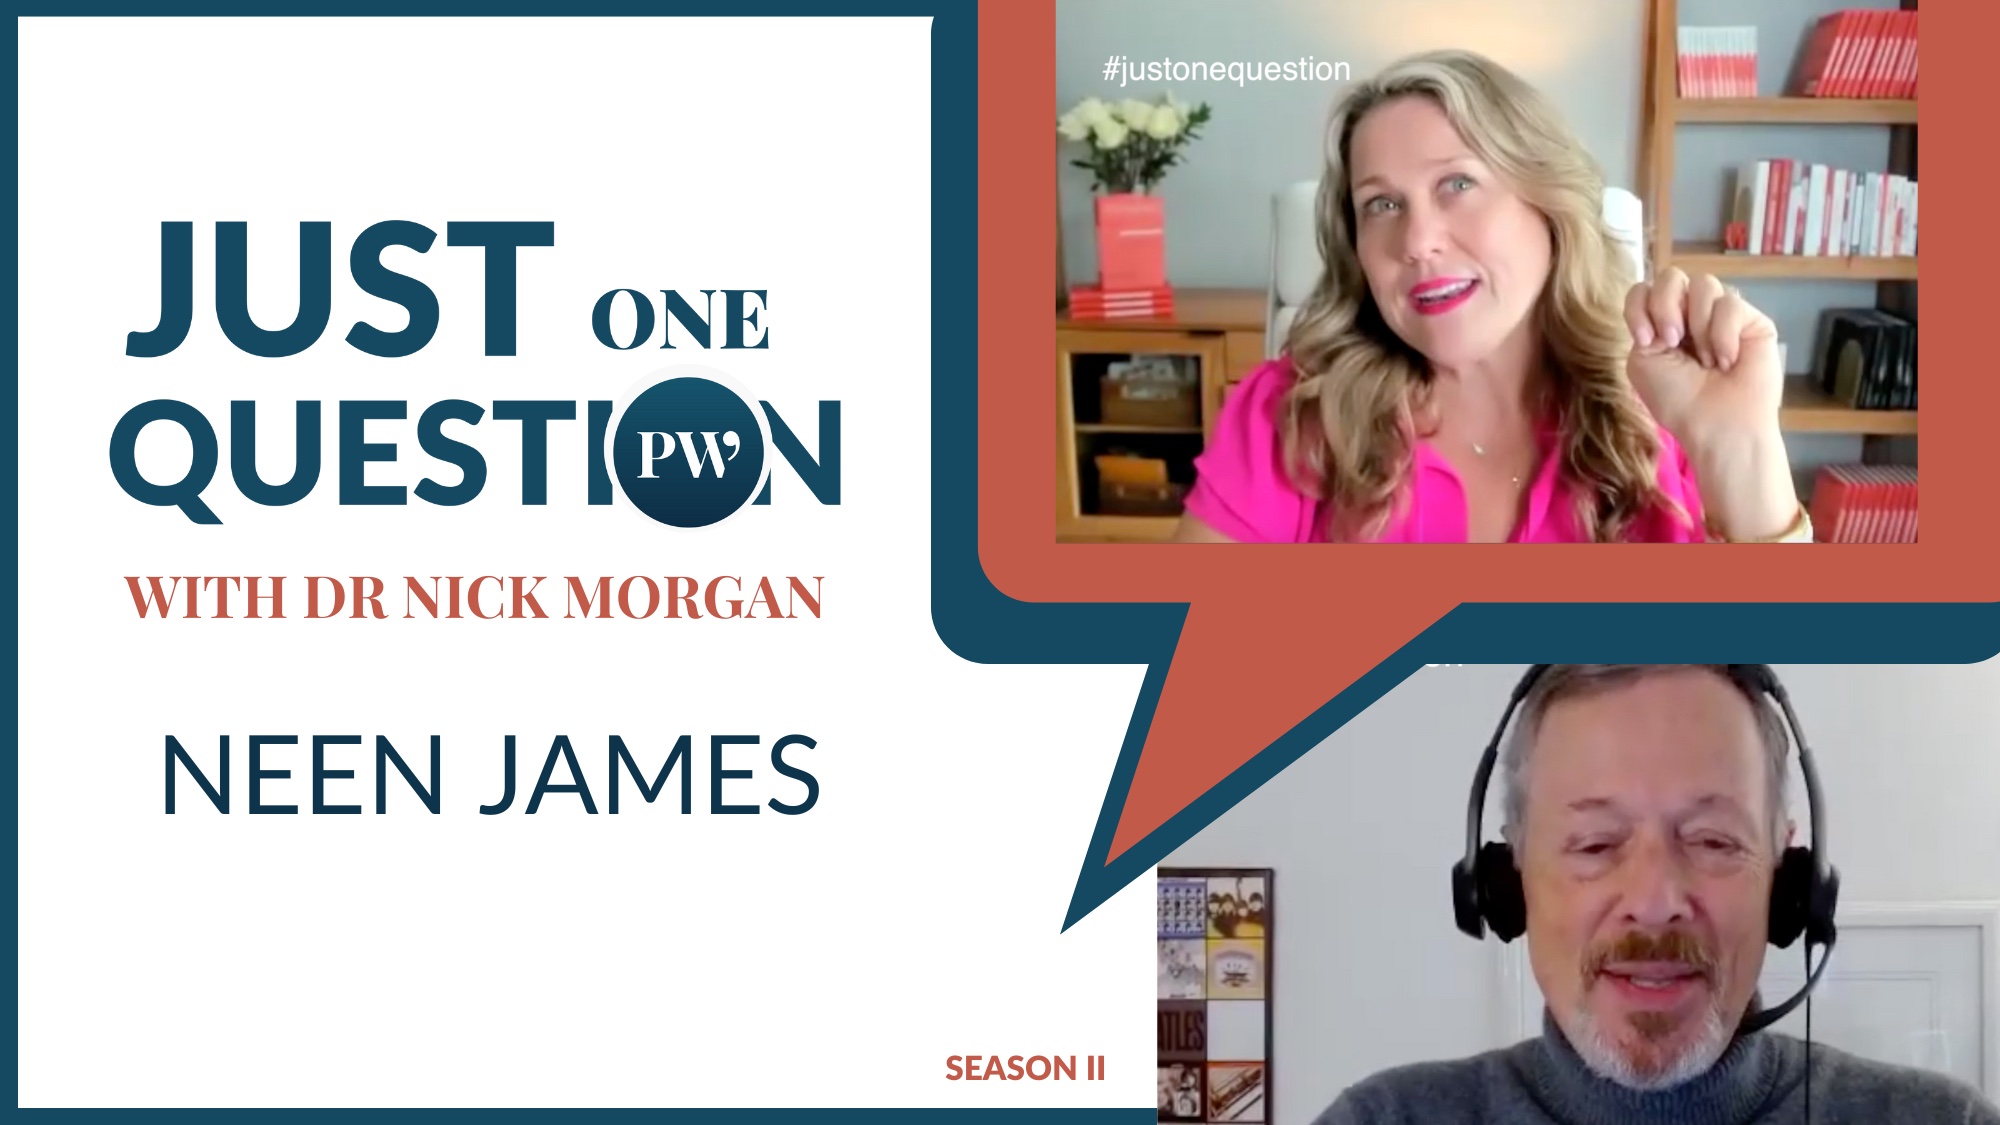 #JustOneQuestion with Nick Morgan